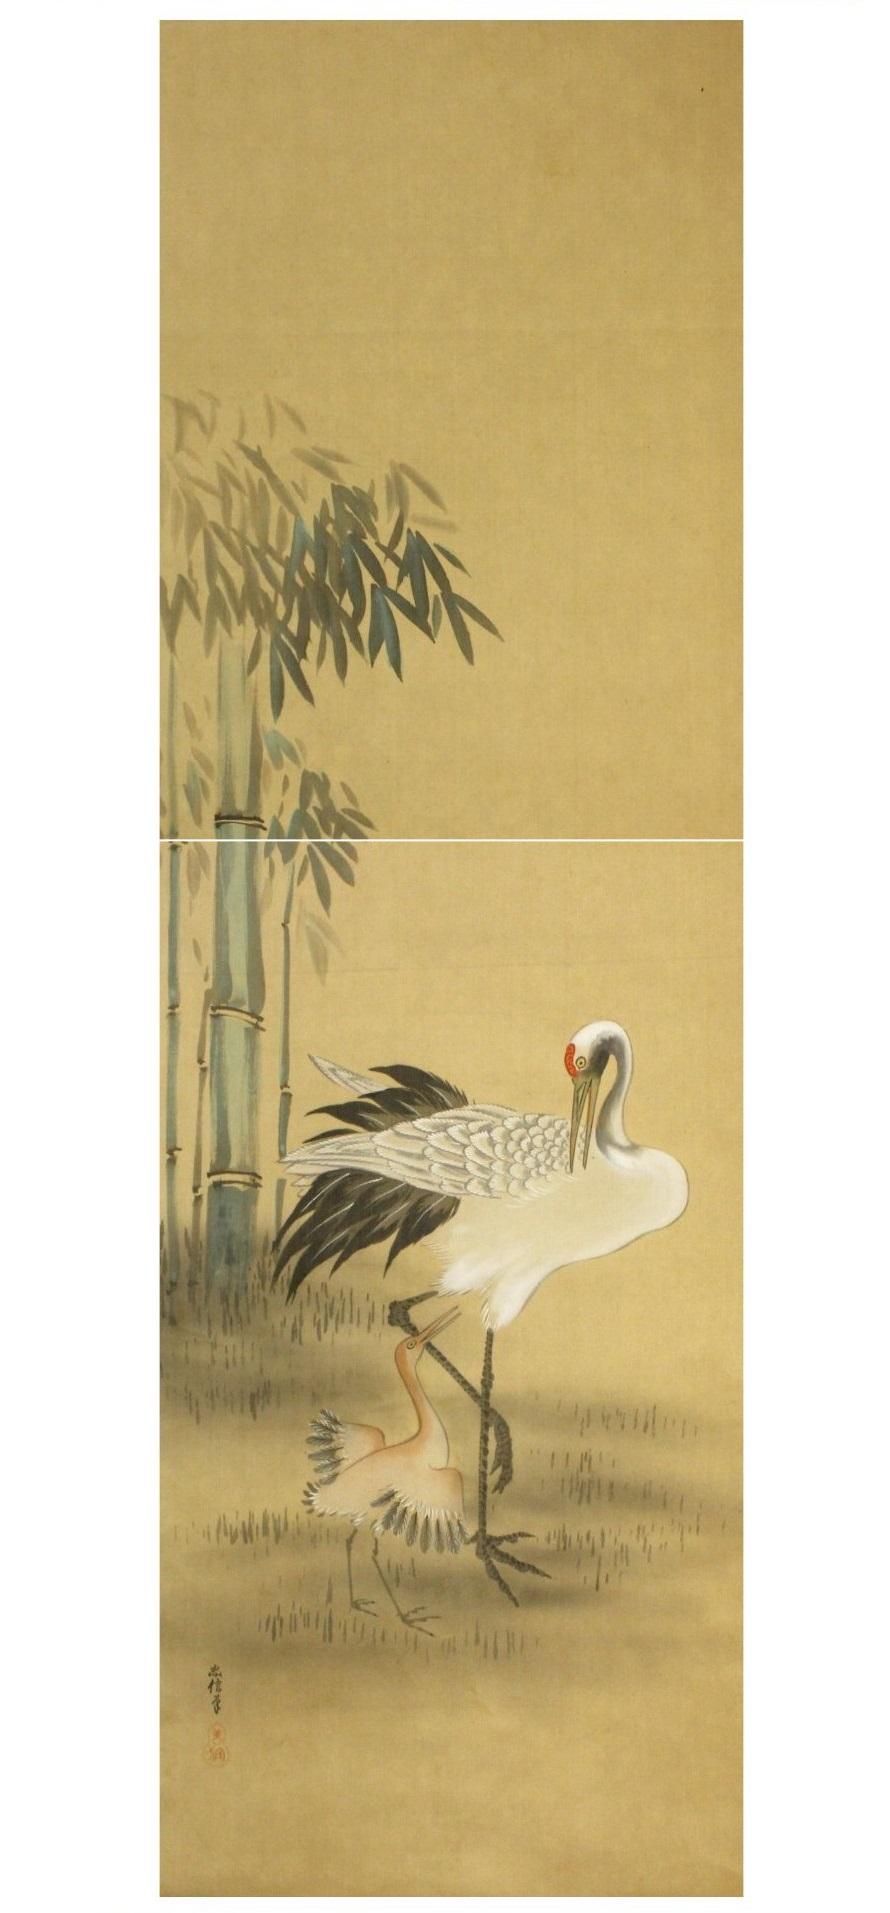 Lovely Japanese Painting 17th c Scroll by Kanō Naonobu Nihonga Cranes Japan In Good Condition For Sale In Amsterdam, Noord Holland